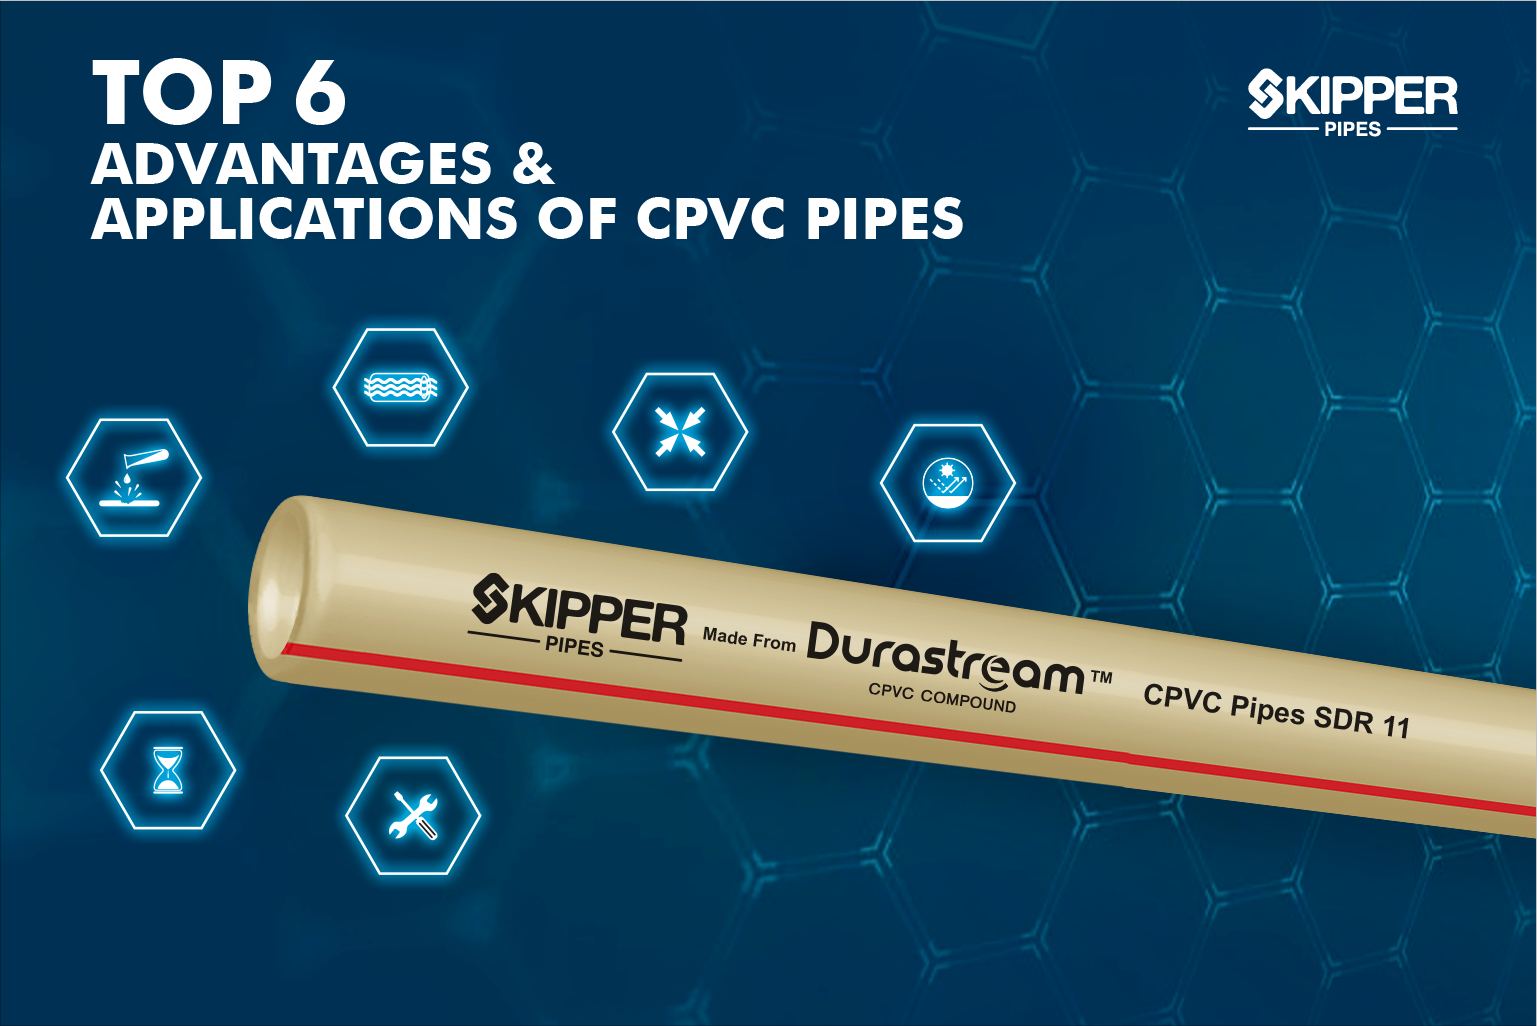 Top 6 Advantage and Applications of CPVC Pipes